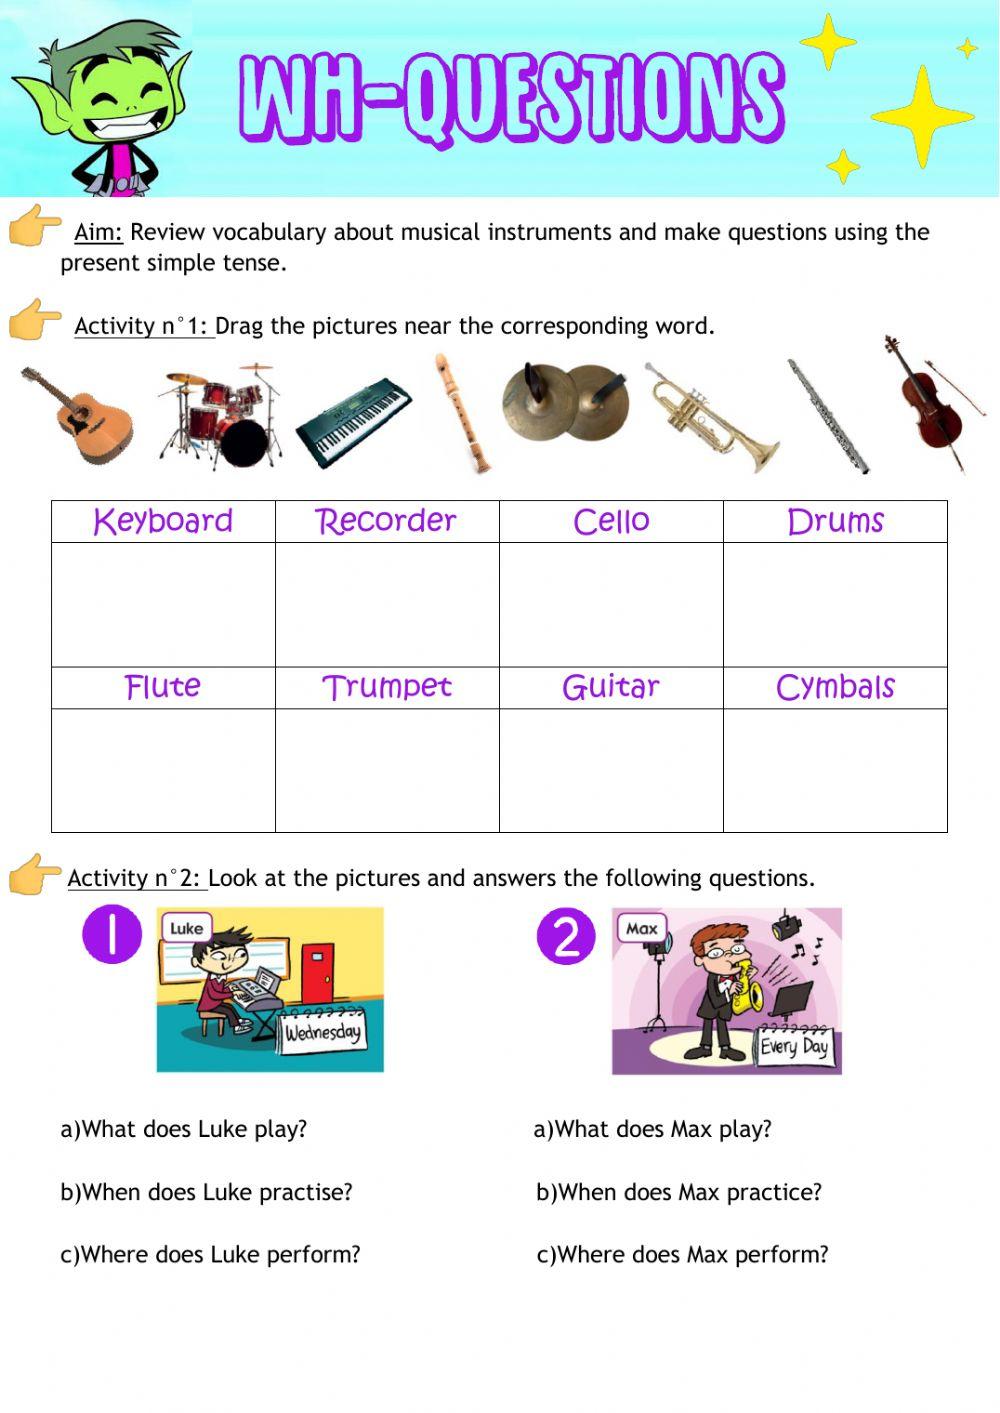 Wh-questions and musical instruments